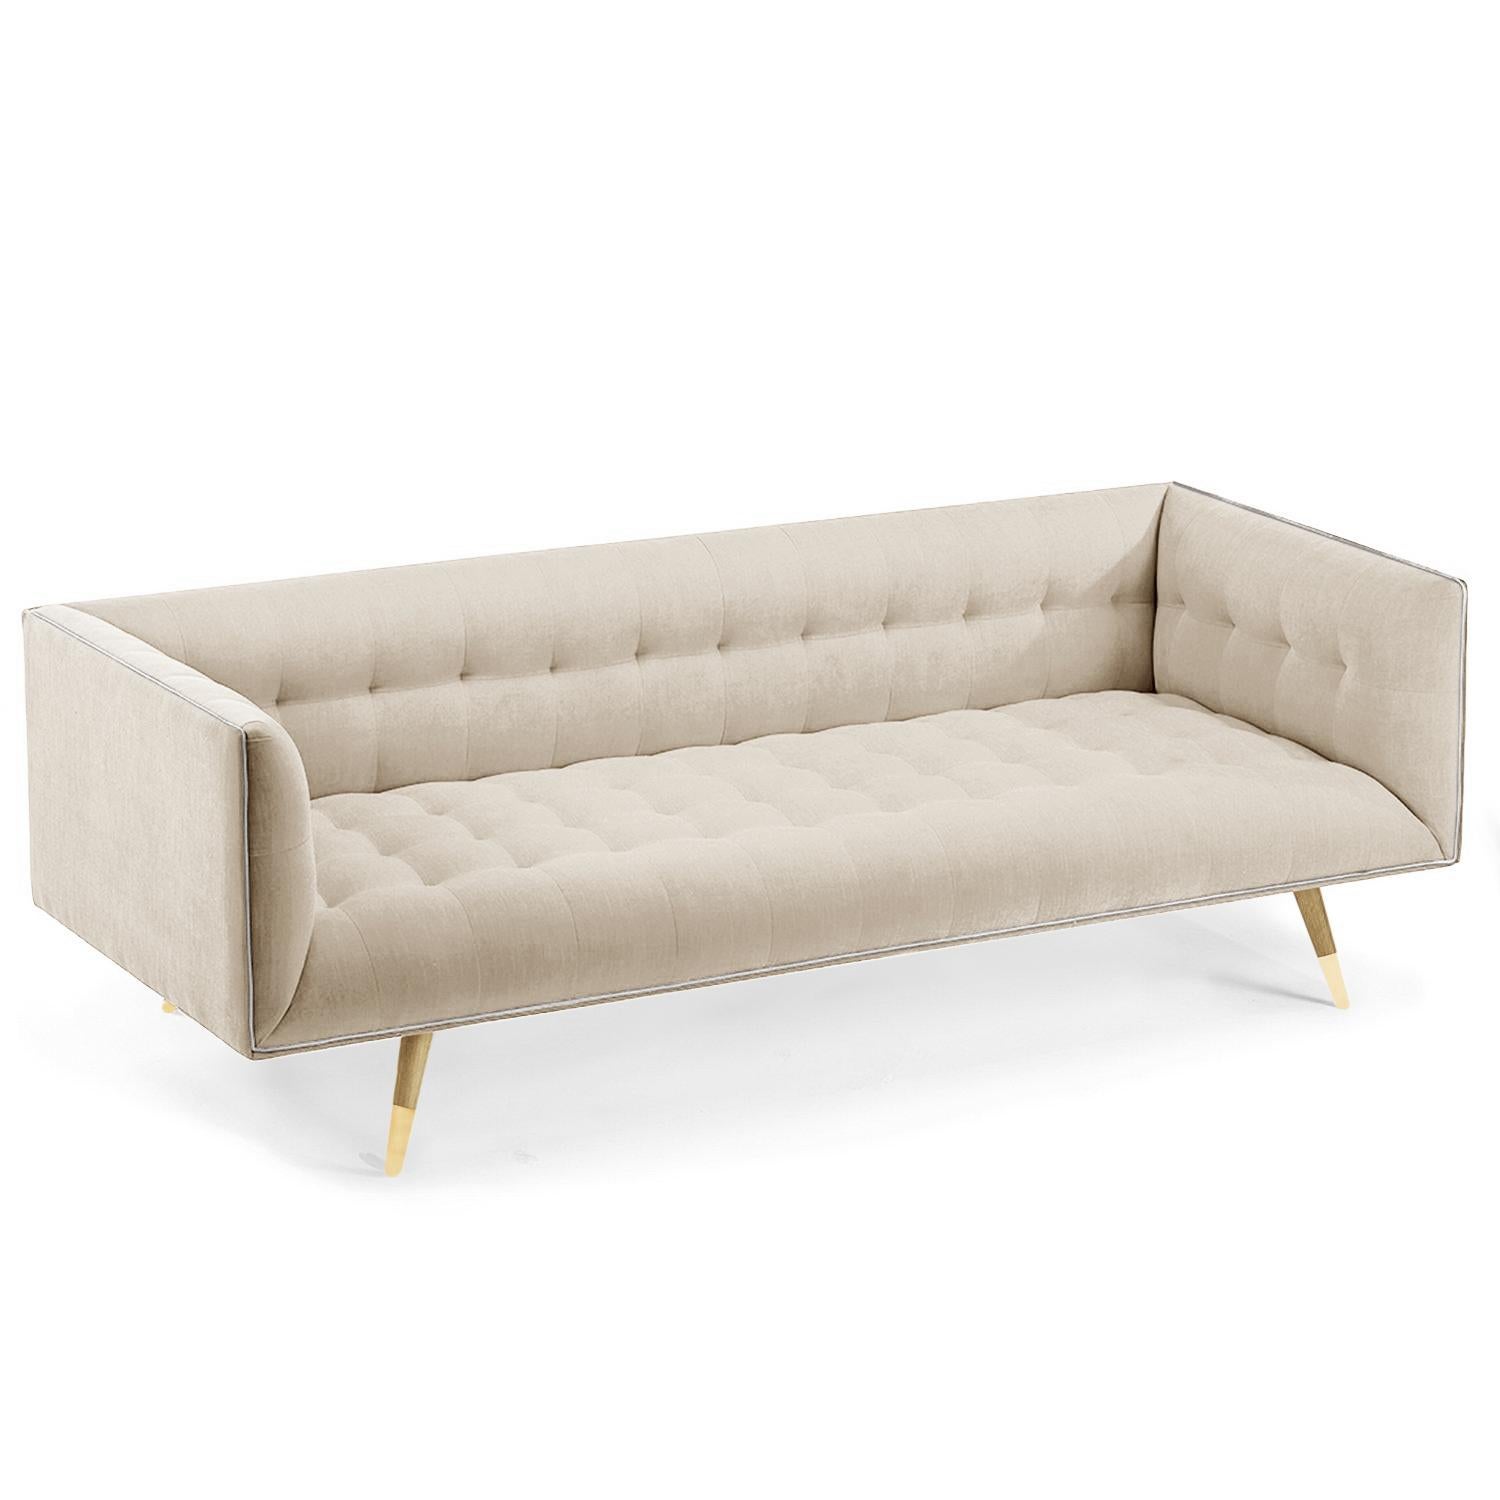 Portuguese Dust Sofa, Small with Natural Light Oak - Polished Brass For Sale